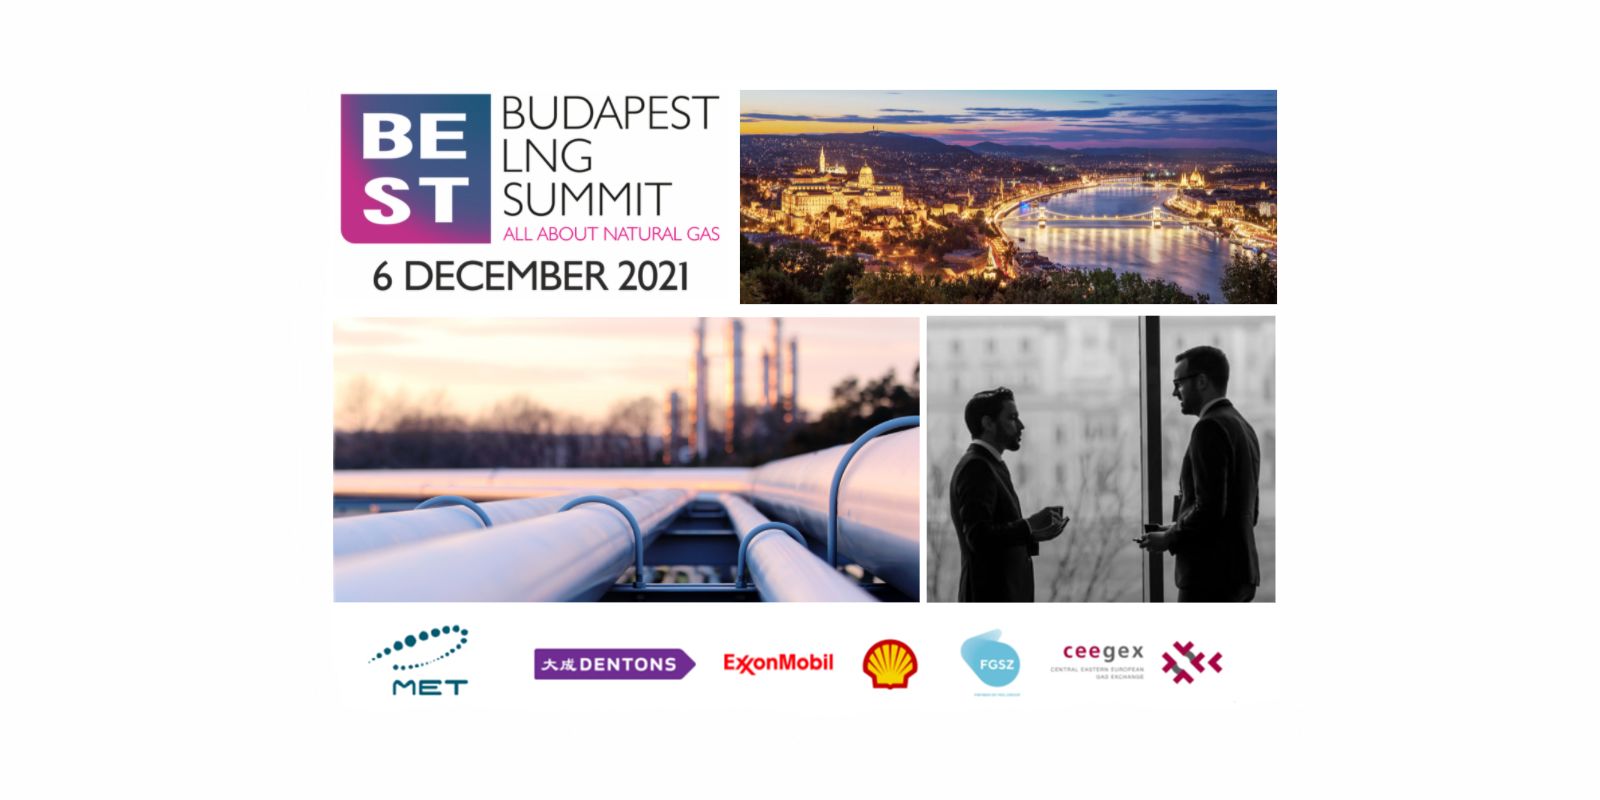 Energy leaders to discuss future of gas at 3. Budapest LNG Summit